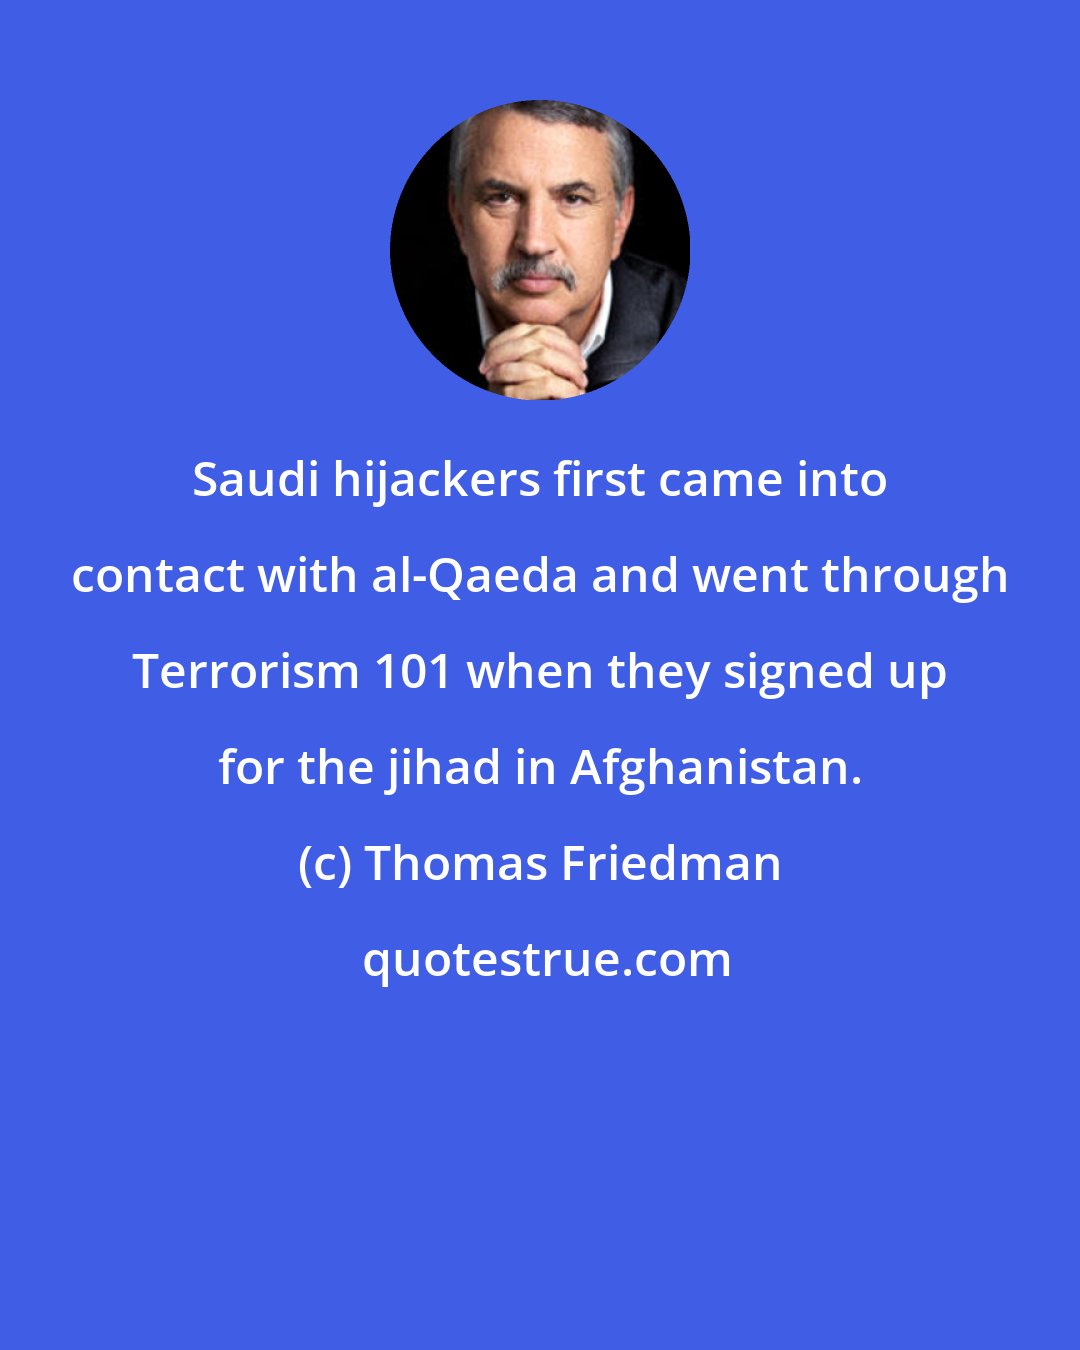 Thomas Friedman: Saudi hijackers first came into contact with al-Qaeda and went through Terrorism 101 when they signed up for the jihad in Afghanistan.